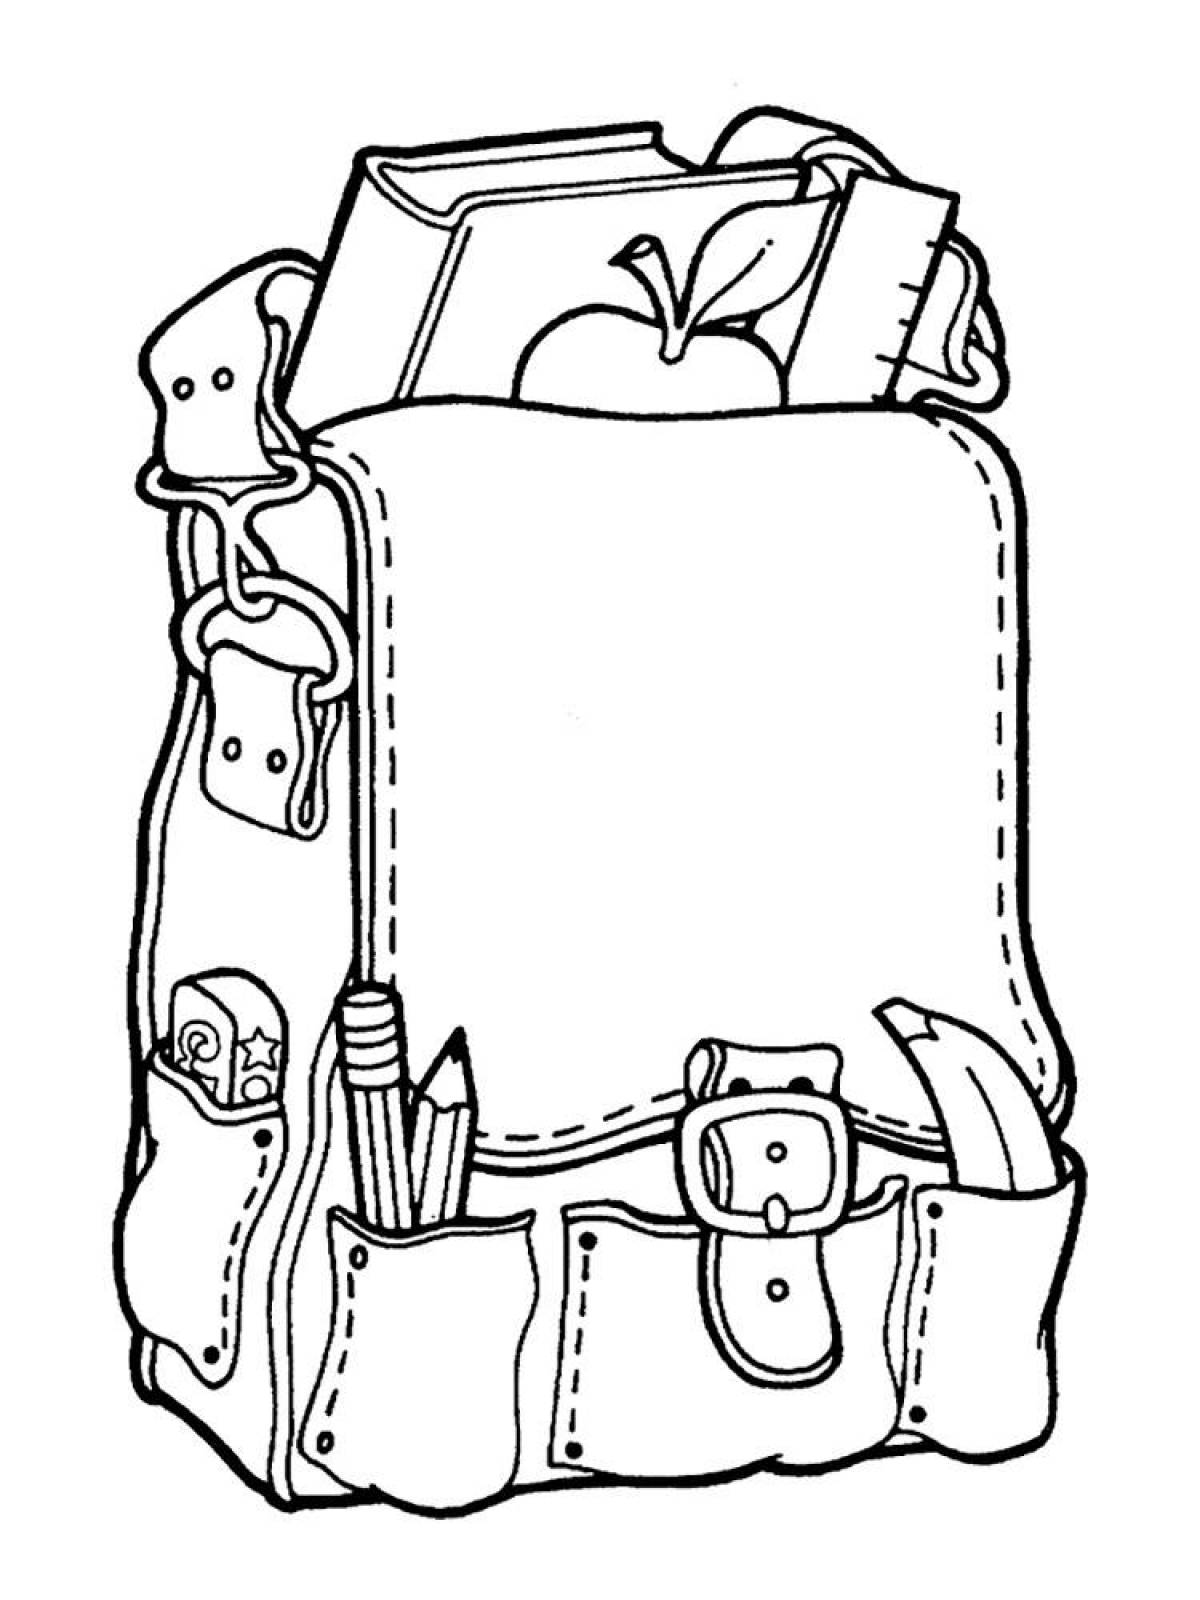 Radiant venezday coloring page